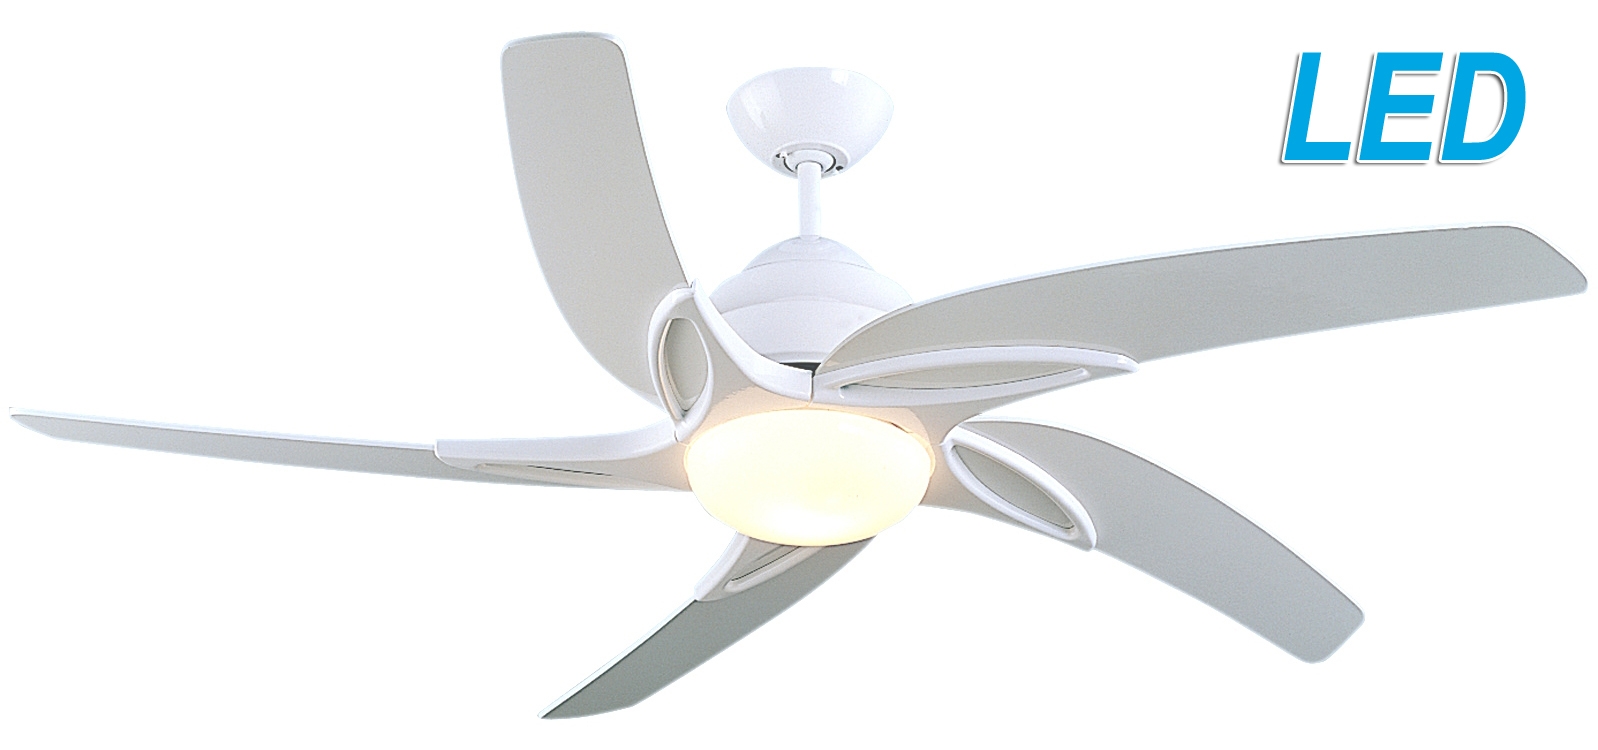 Ceiling Fan With Led Light And Remote Control